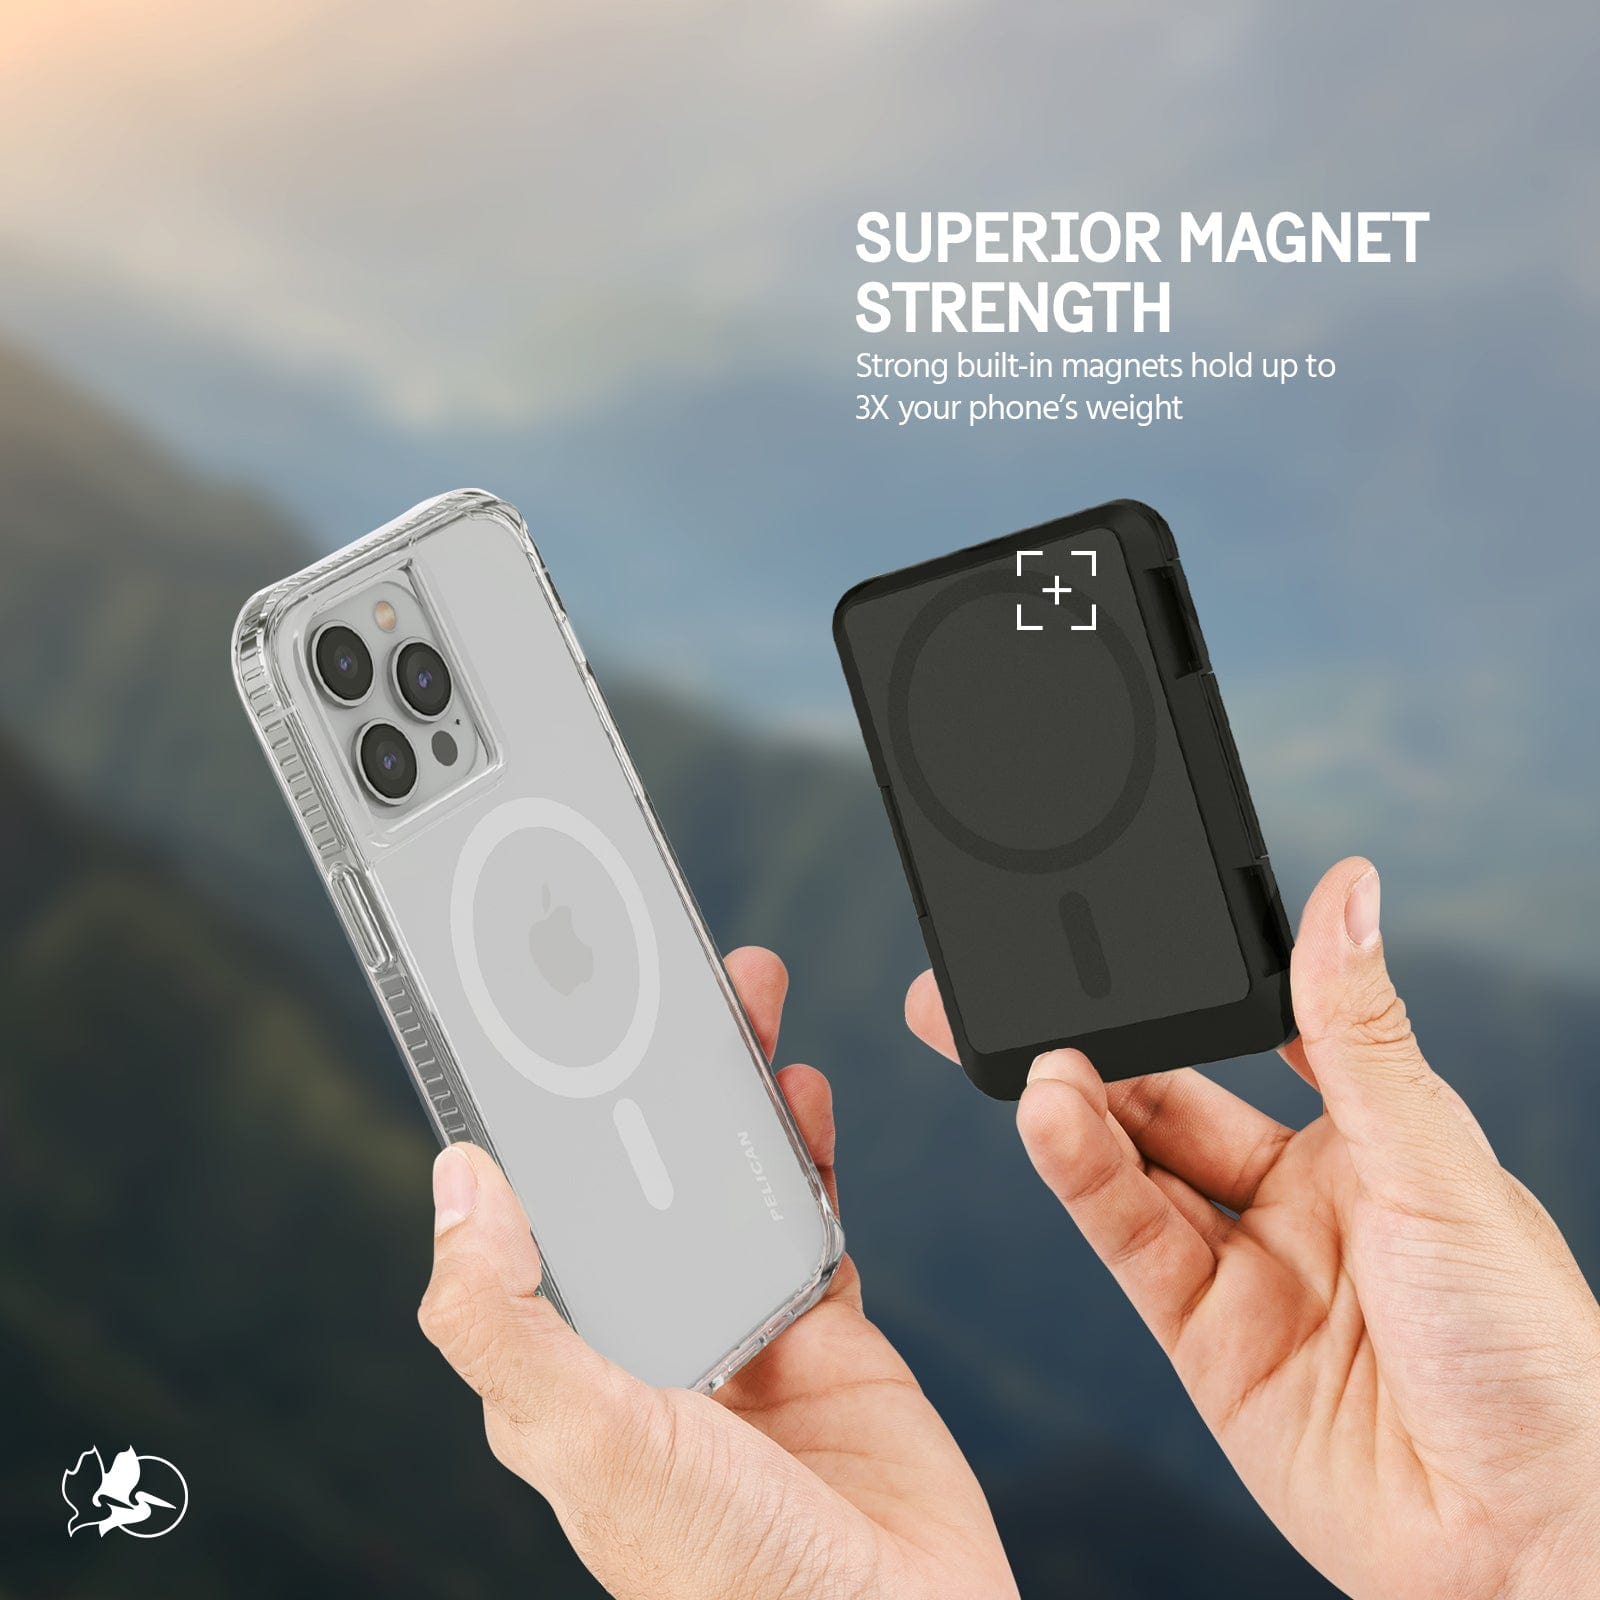 SUPERIOR MAGNETS STRENGTH. STRONG BUILT-IN MAGNETS HOLD UP TO 3X YOUR PHONE'S WEIGHT